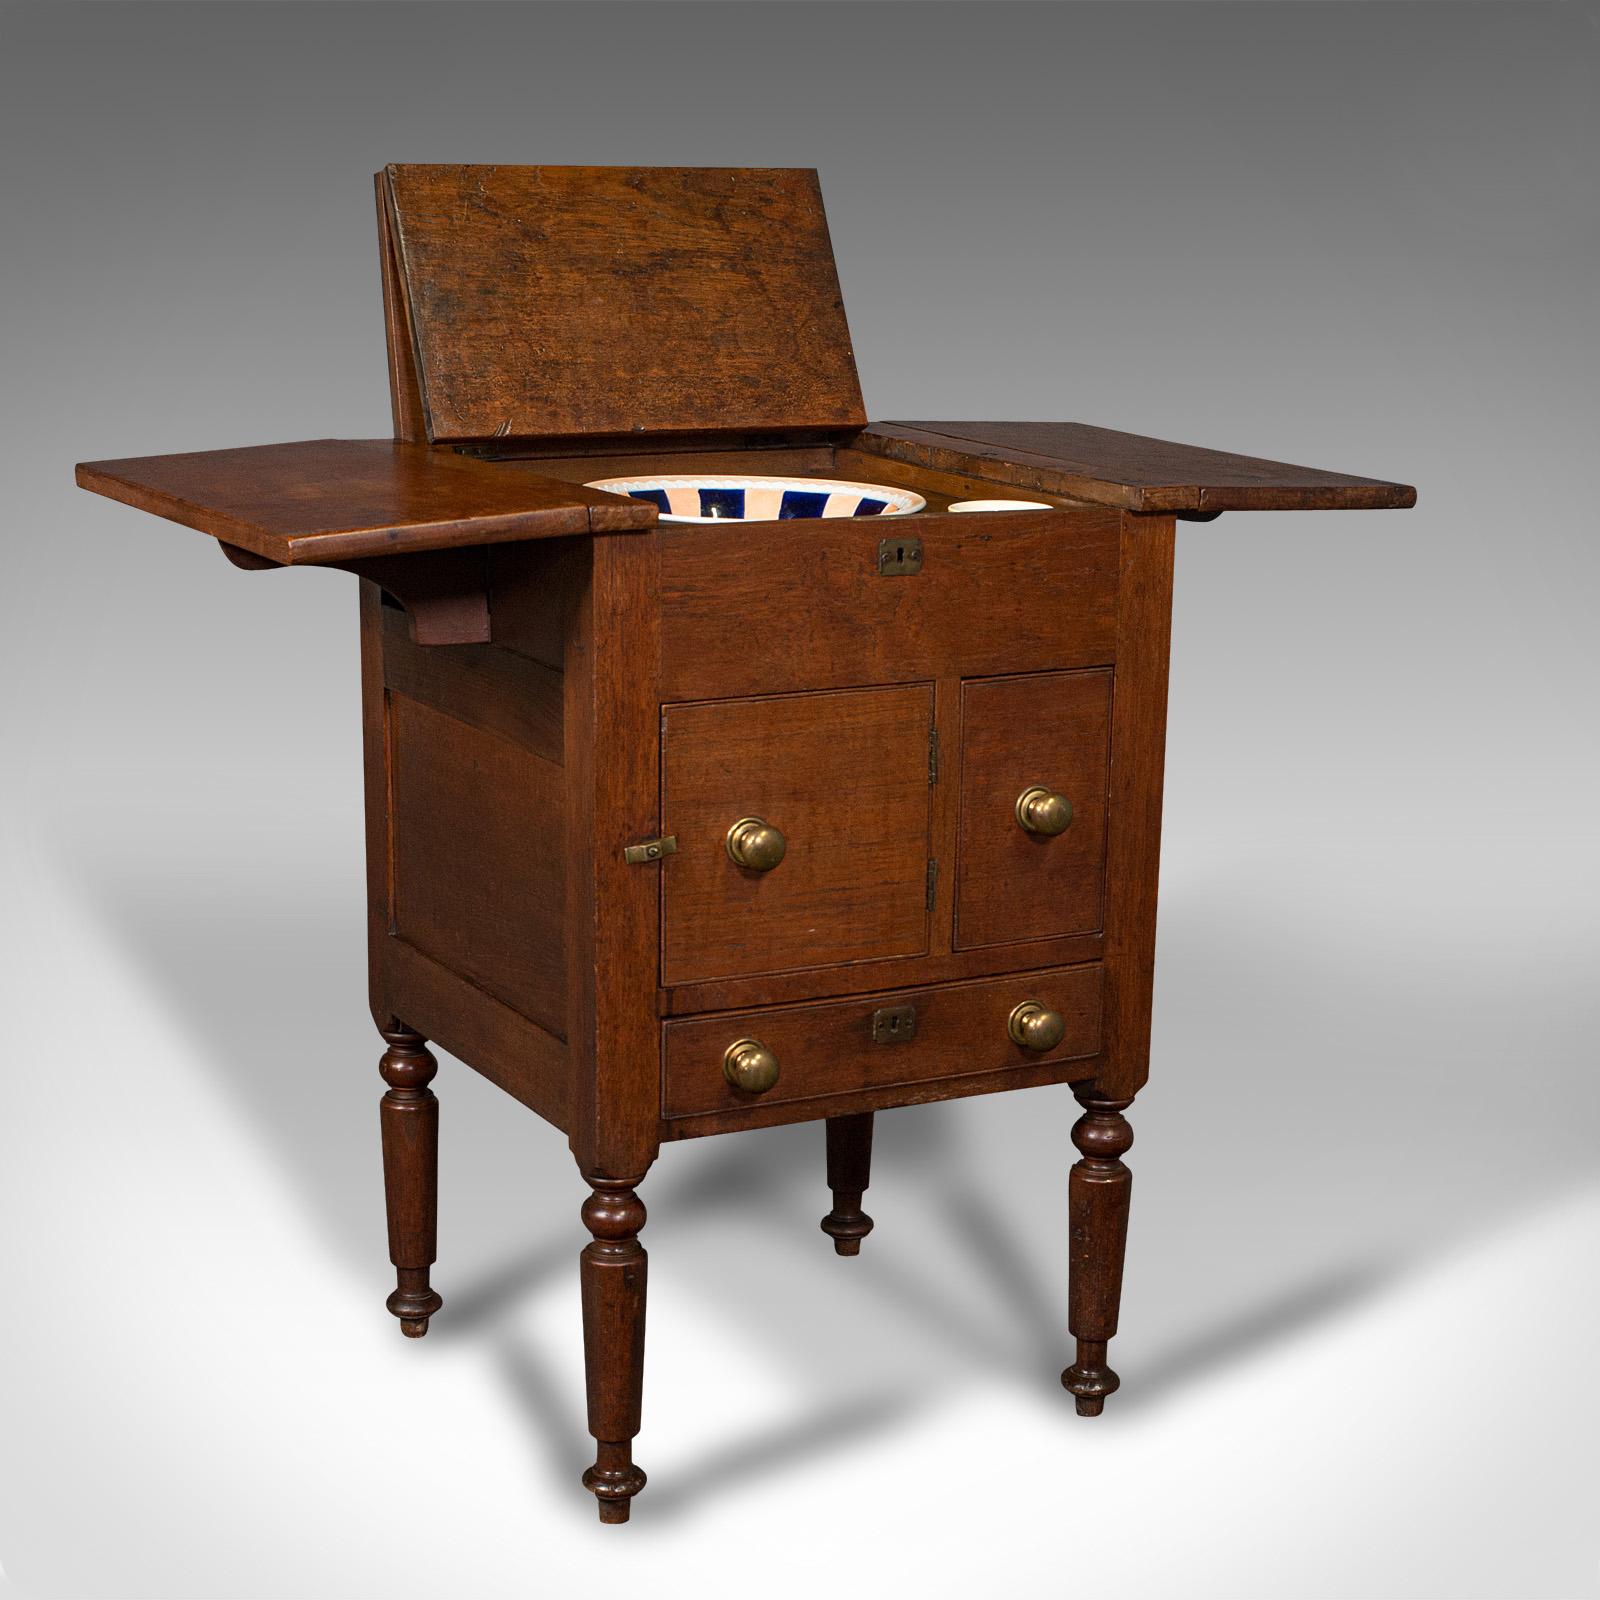 This is an antique ship's wash stand. An English, mahogany drop flap nightstand, dating to the early Victorian period, circa 1850.

Fascinating example of maritime furniture
Displays a desirable aged patina with original marks commensurate with